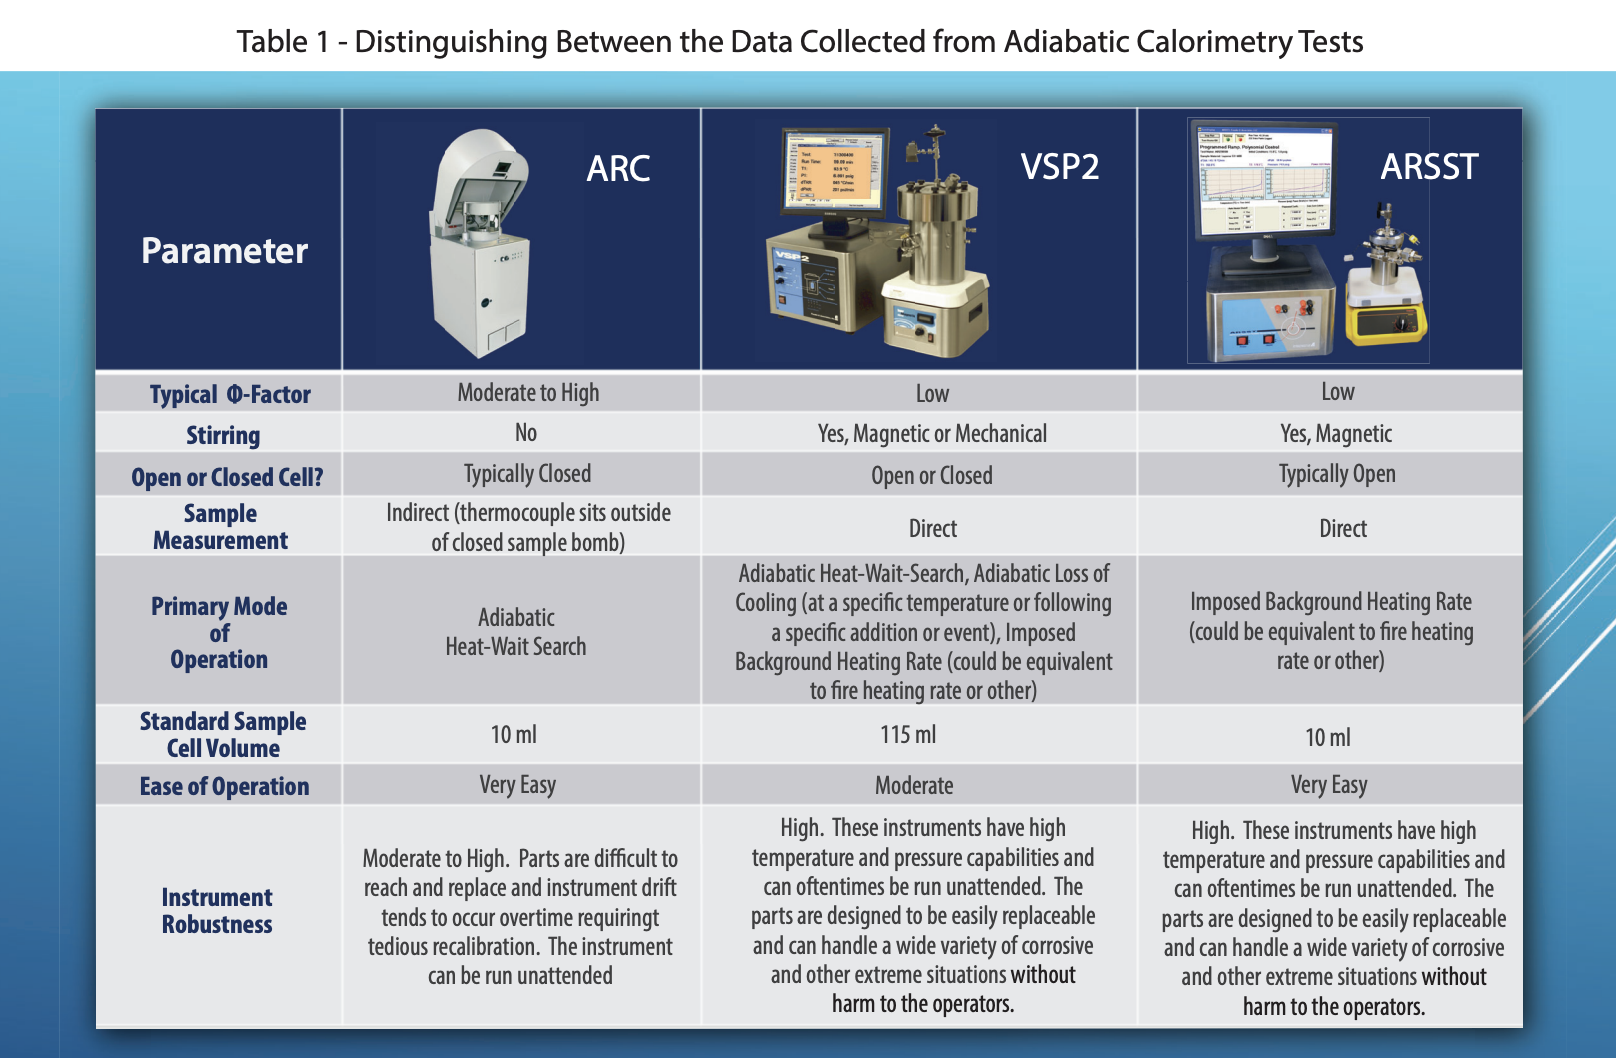 Table 1 - Distinguishing Between the Data Collected from Adiabatic Calorimetry Tests